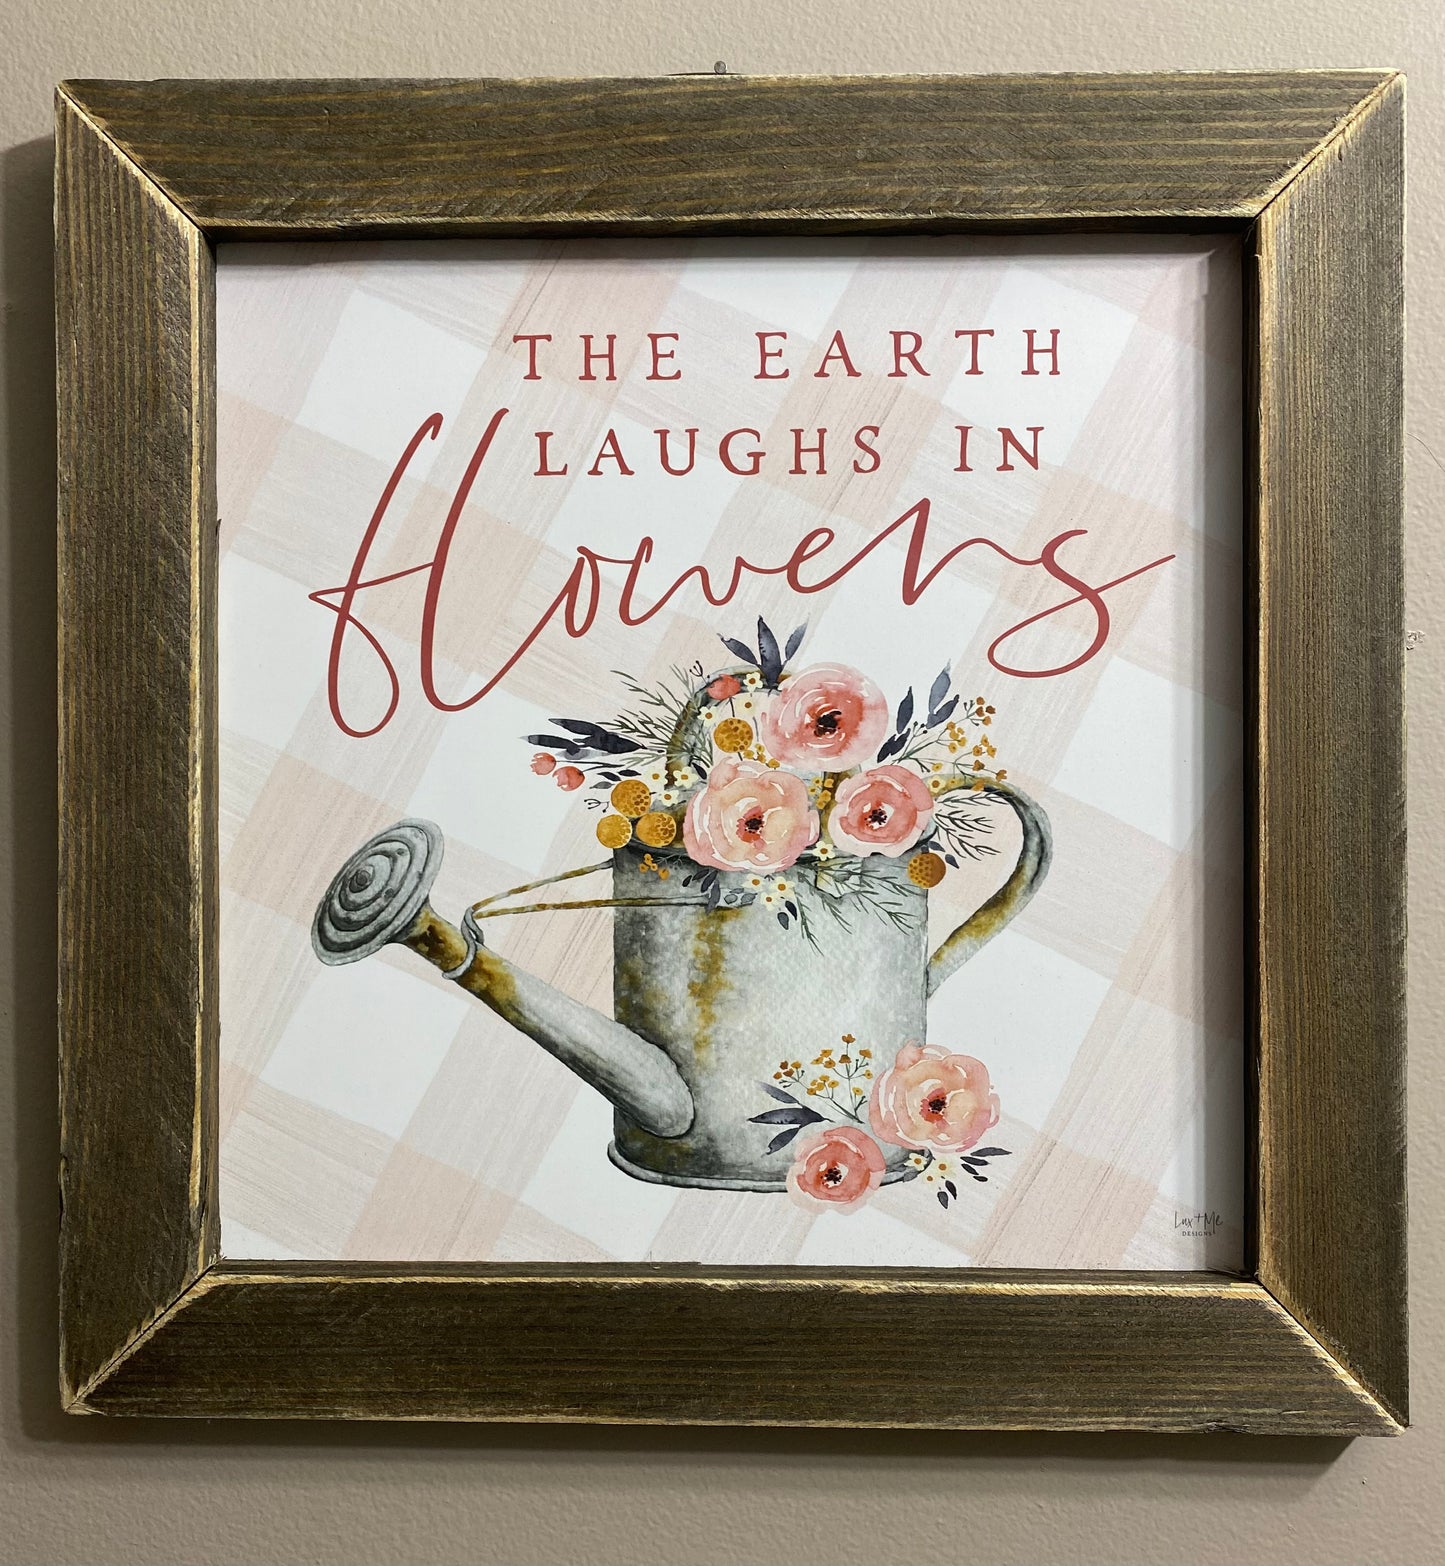 JM-The Earth Laughs in Flowers (Gina B's)